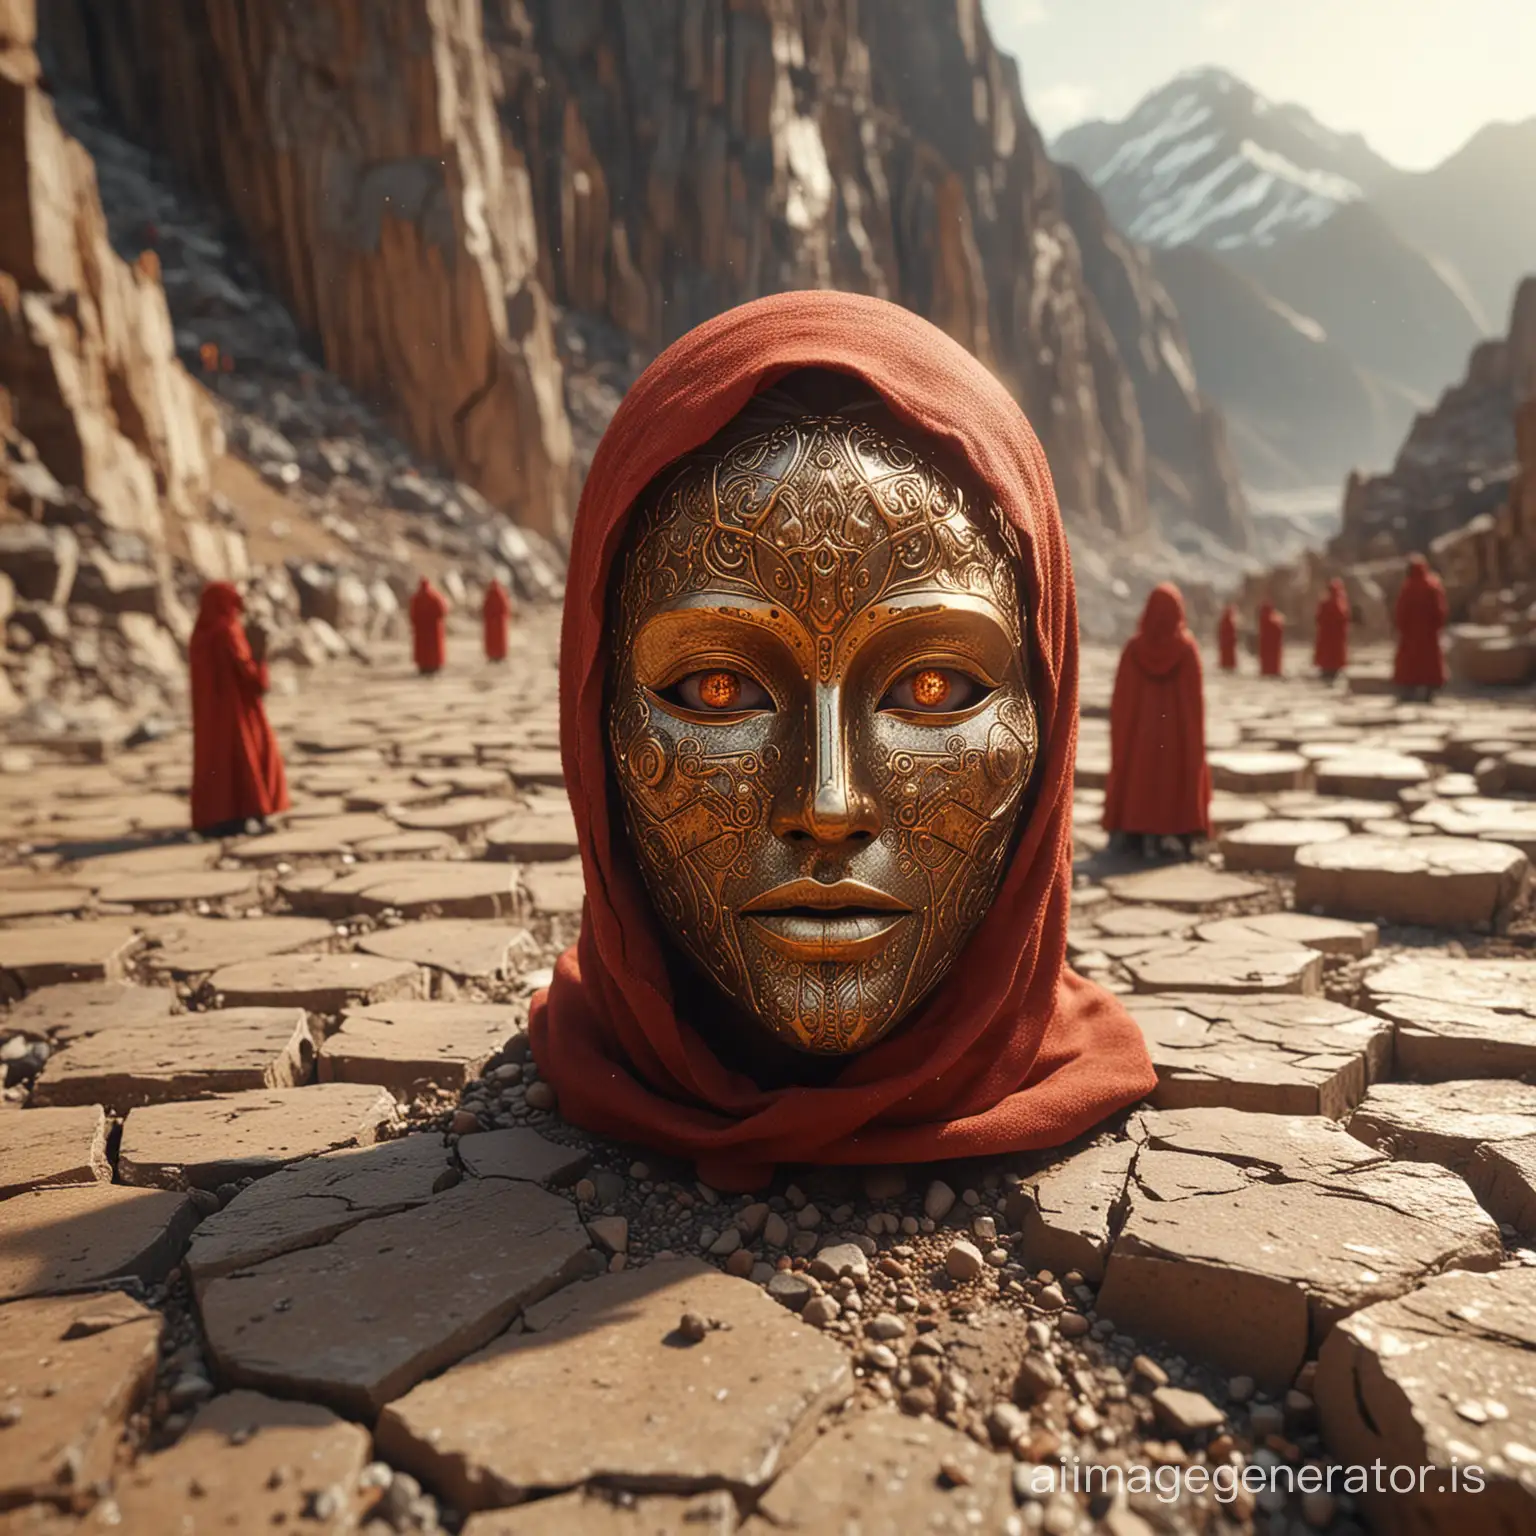 Tall-Beings-in-Red-Cloaks-on-Ashy-Mountain-Spaces-Epically-Pathetic-TiltShift-Engraving